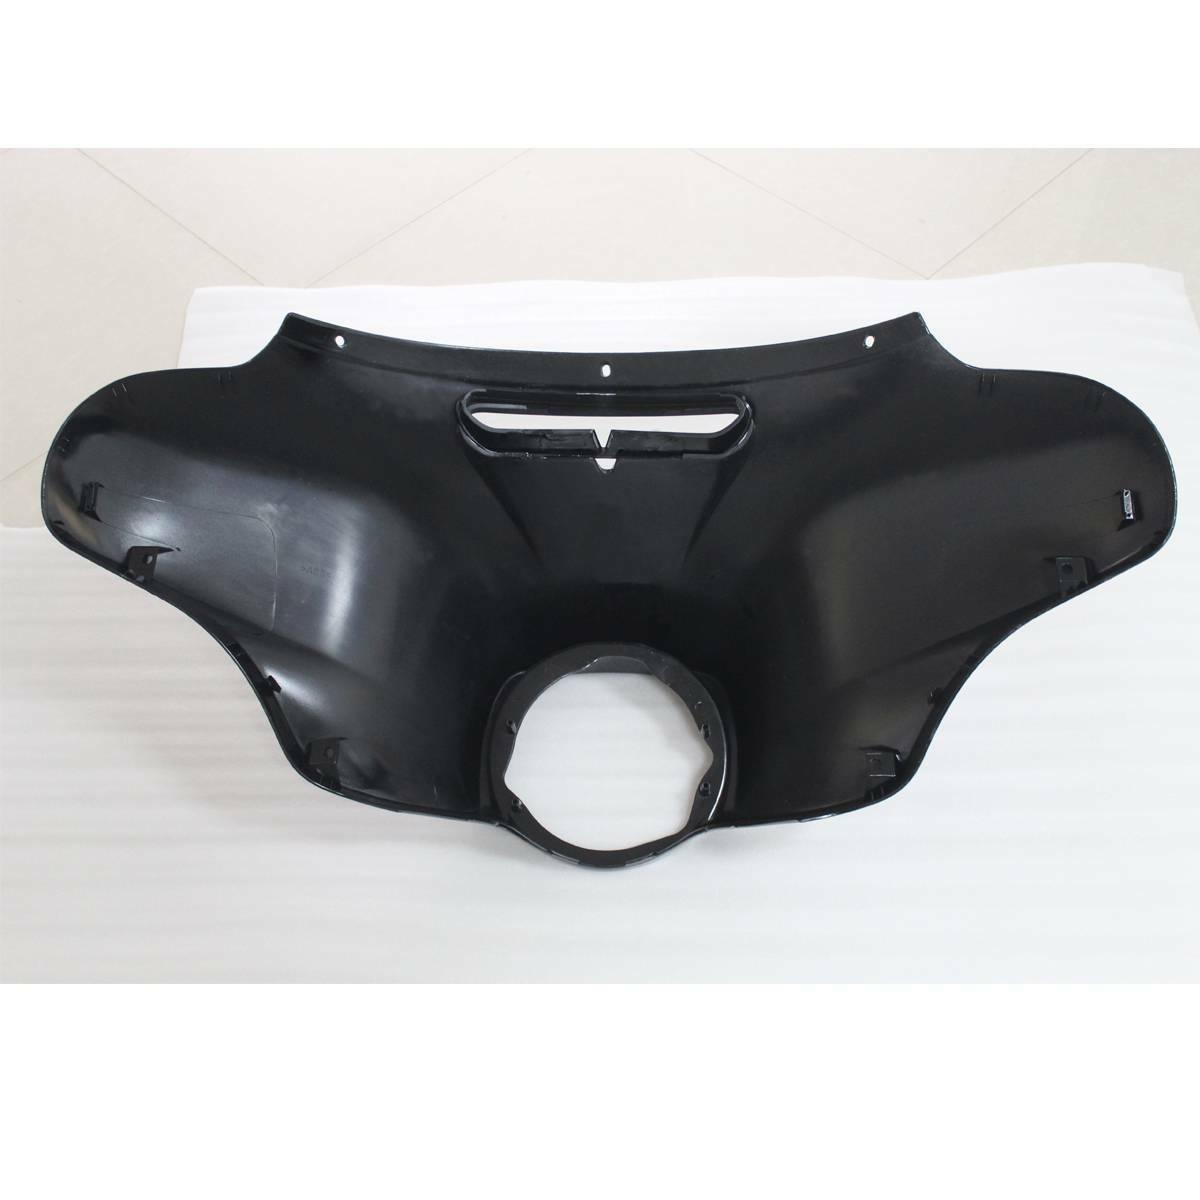 Black ABS Batwing Front Outer Fairing For Harley Street Glide FLHXS 2014-2020 - Moto Life Products